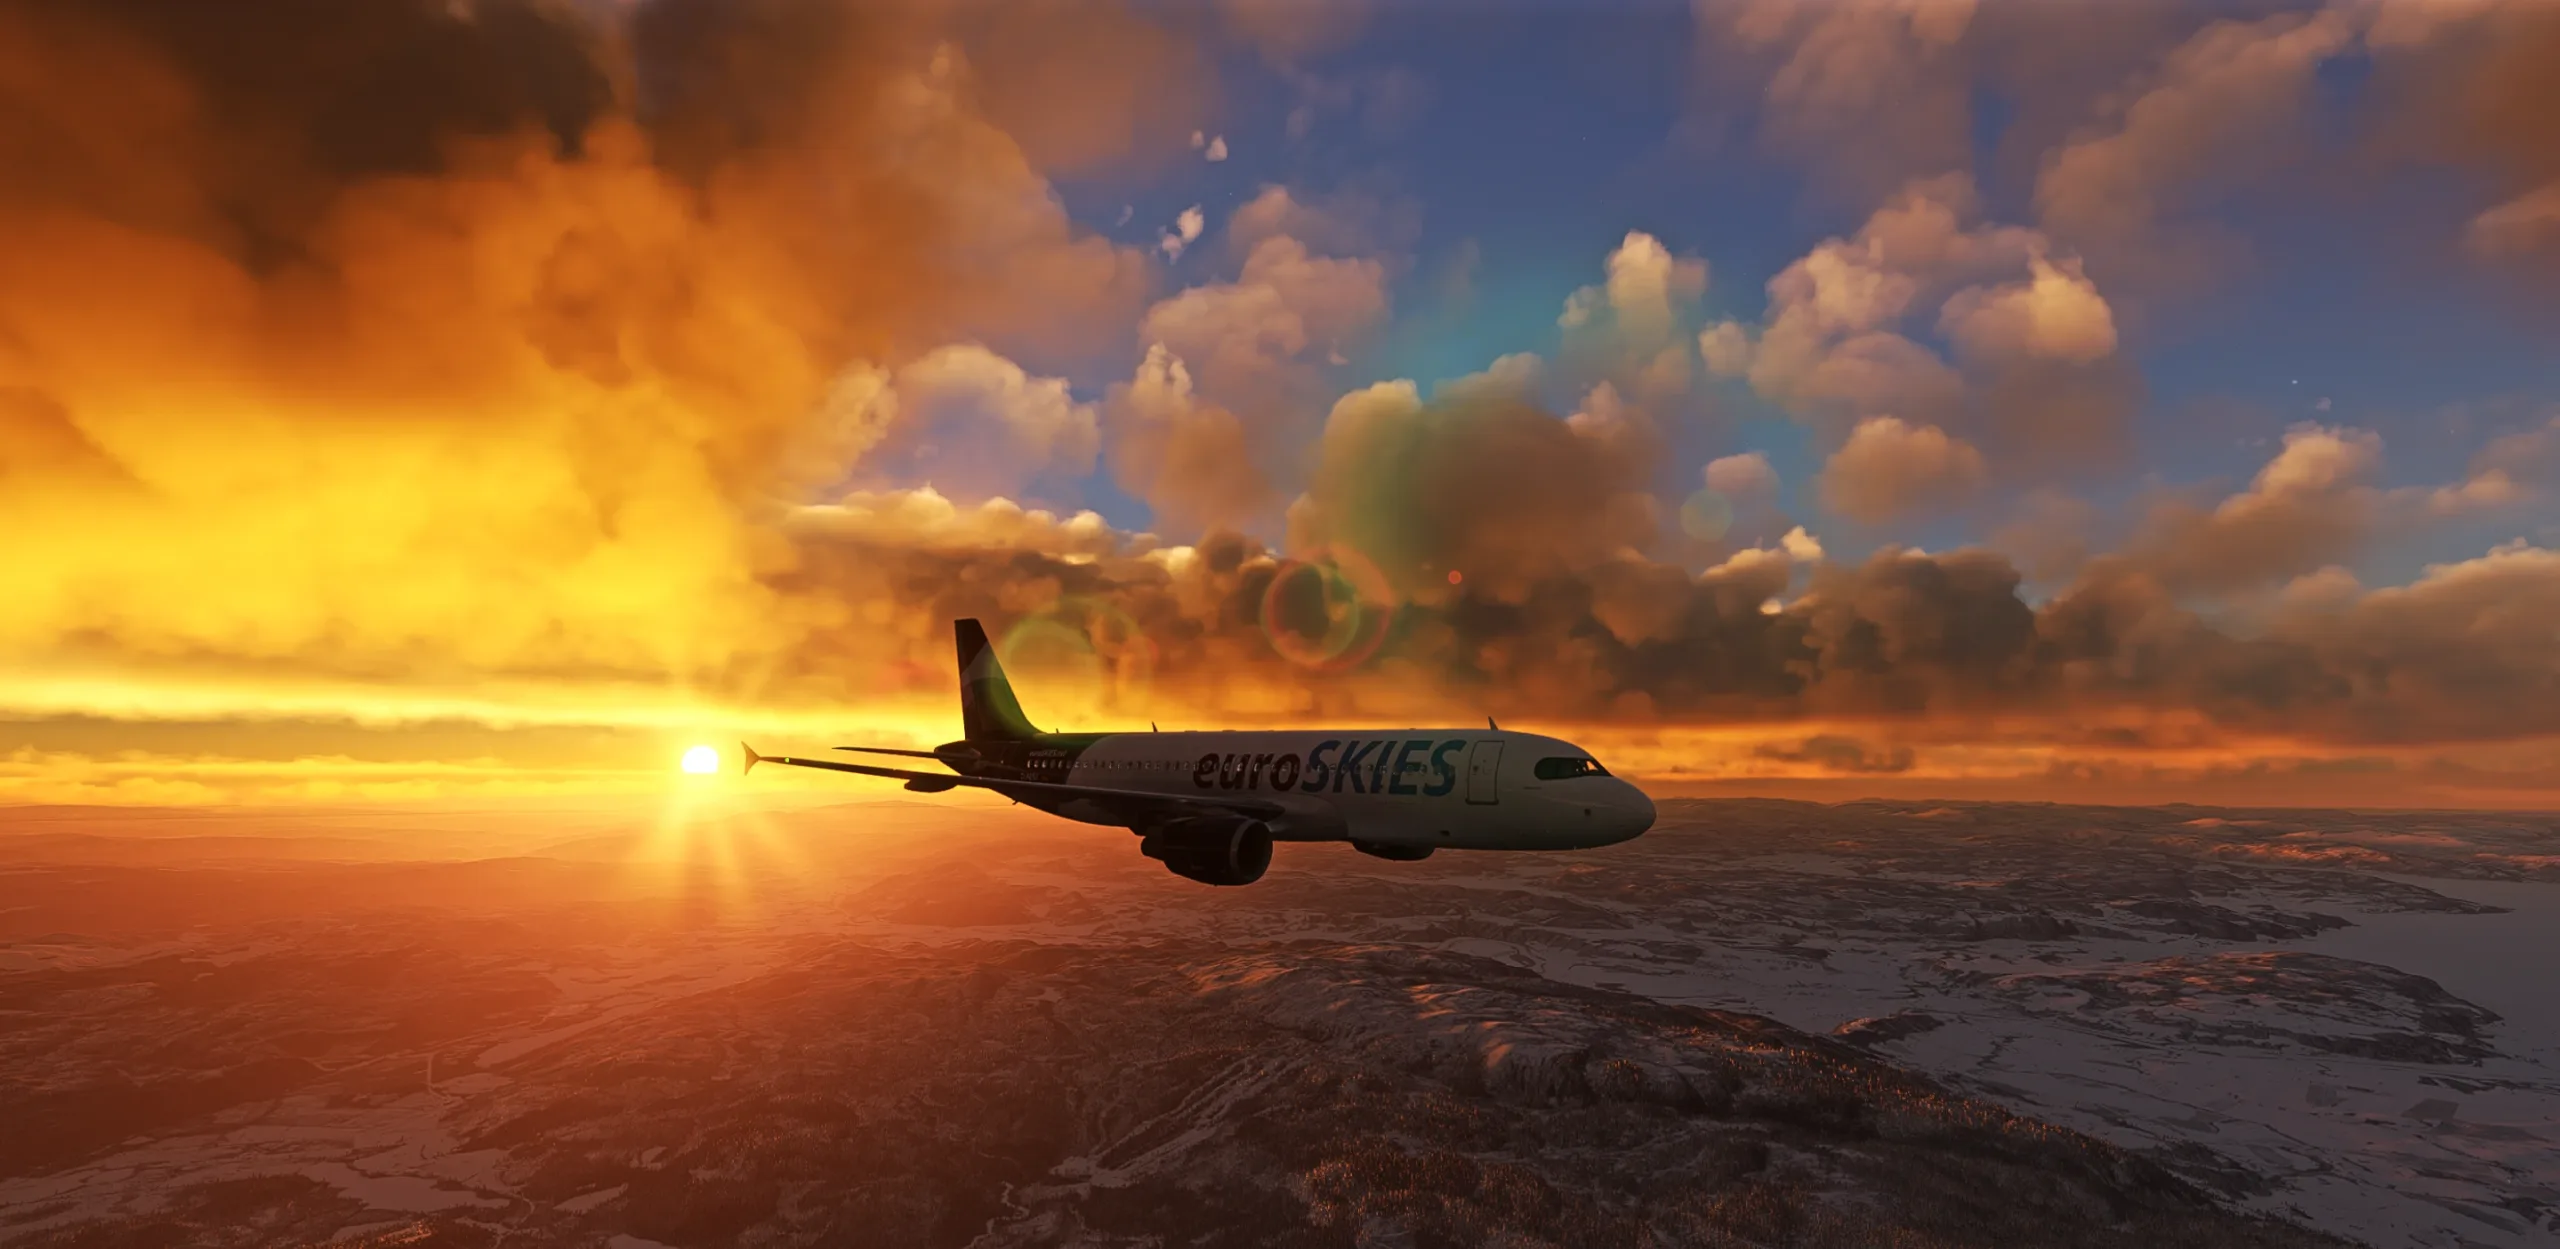 euroSKIES  airbus a320 performing checks during sunset snowy approach